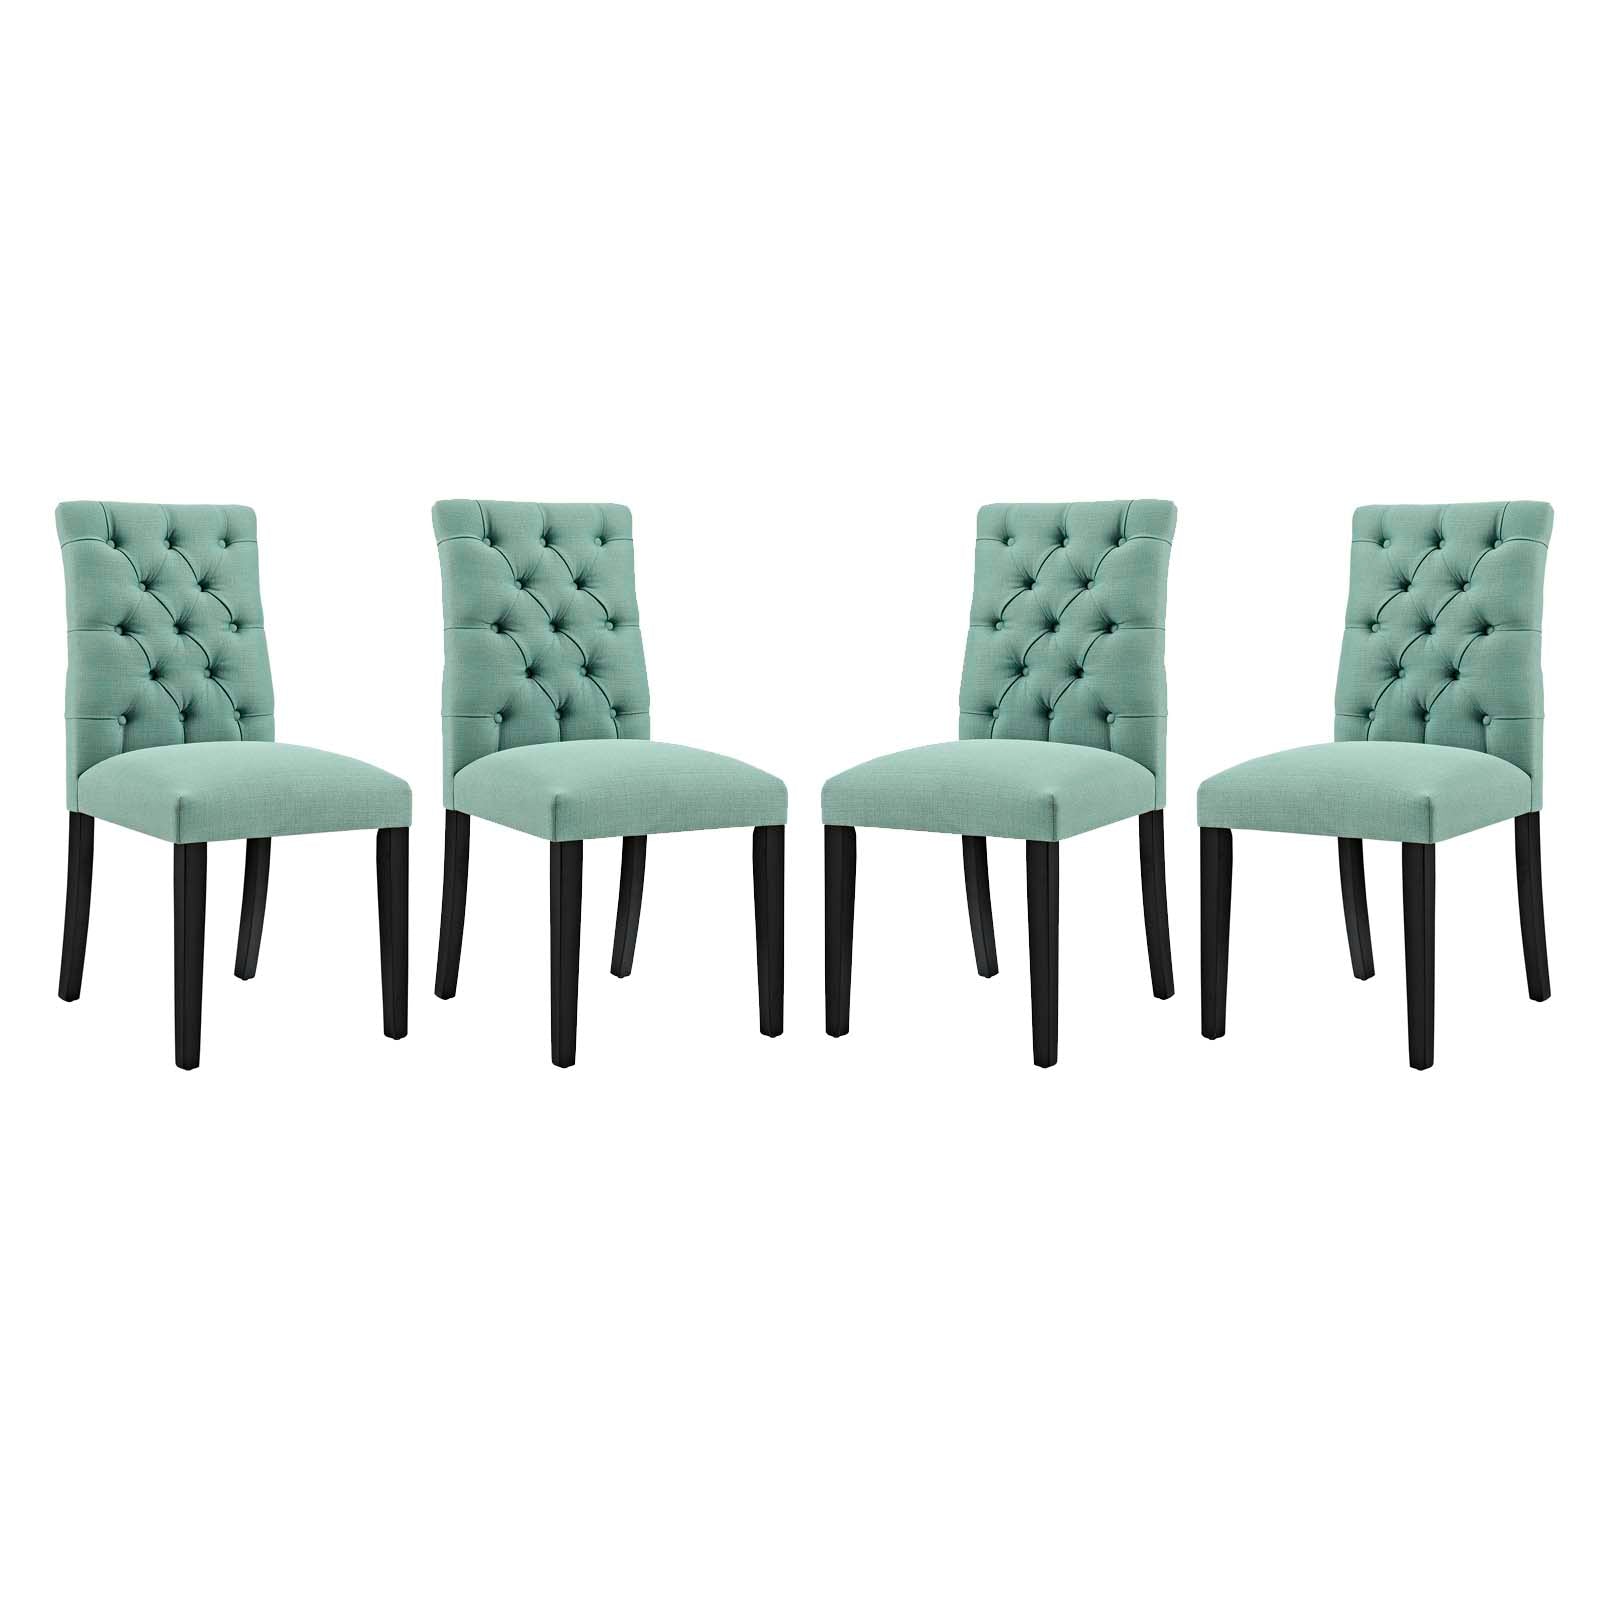 Modway Dining Chairs - Duchess Dining Chair Fabric ( Set of 4 ) Laguna